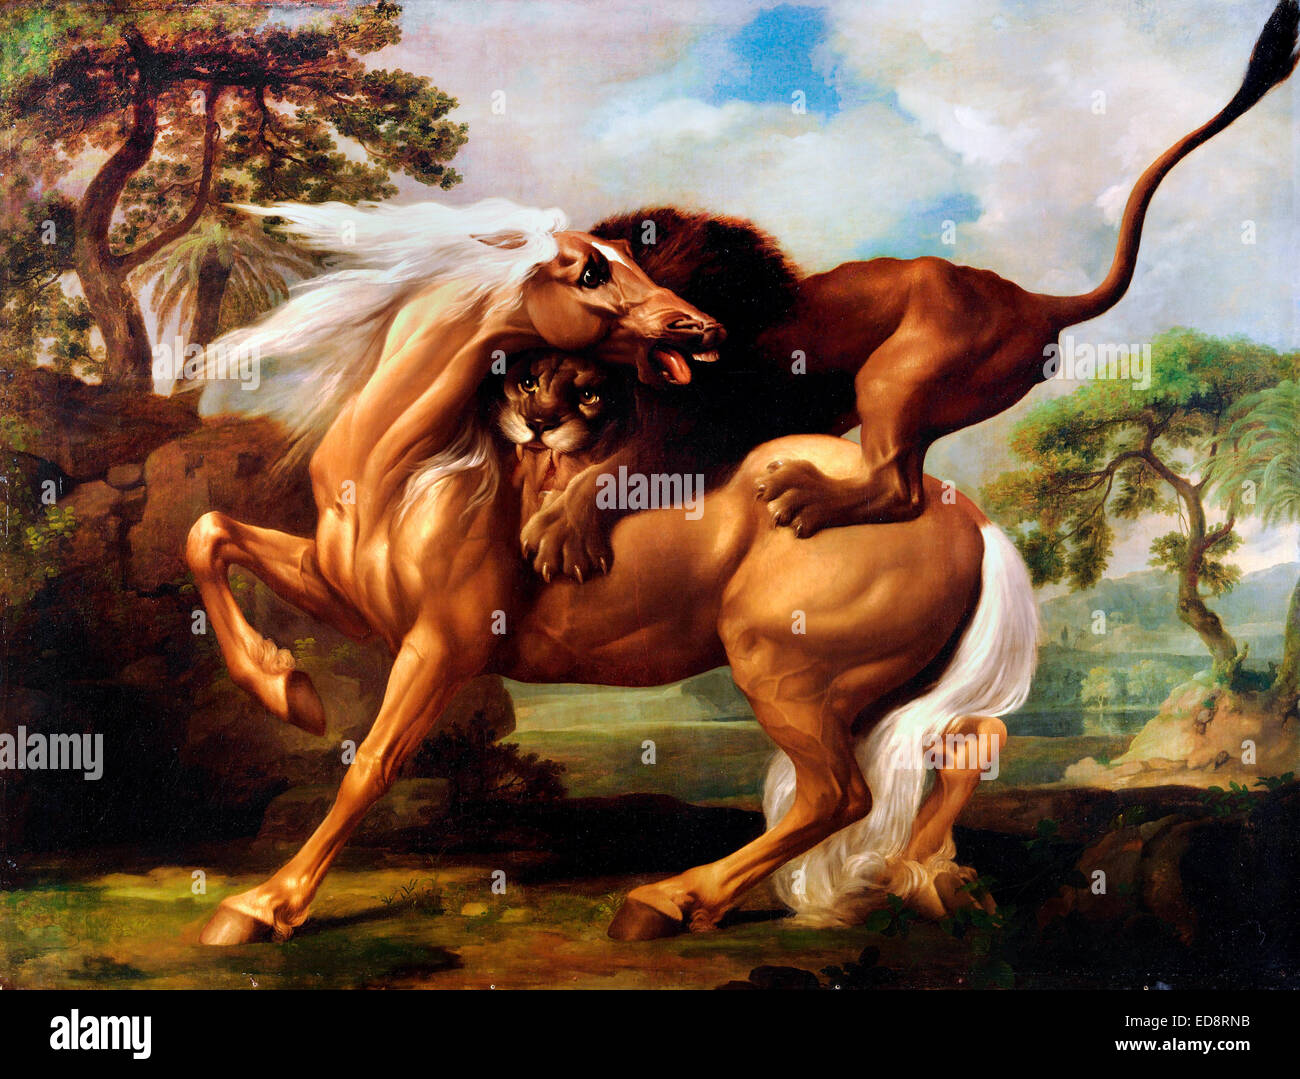 George Stubbs, A Lion Attacking a Horse 1762 Oil on canvas. Yale Center for British Art, New Haven, USA. Stock Photo